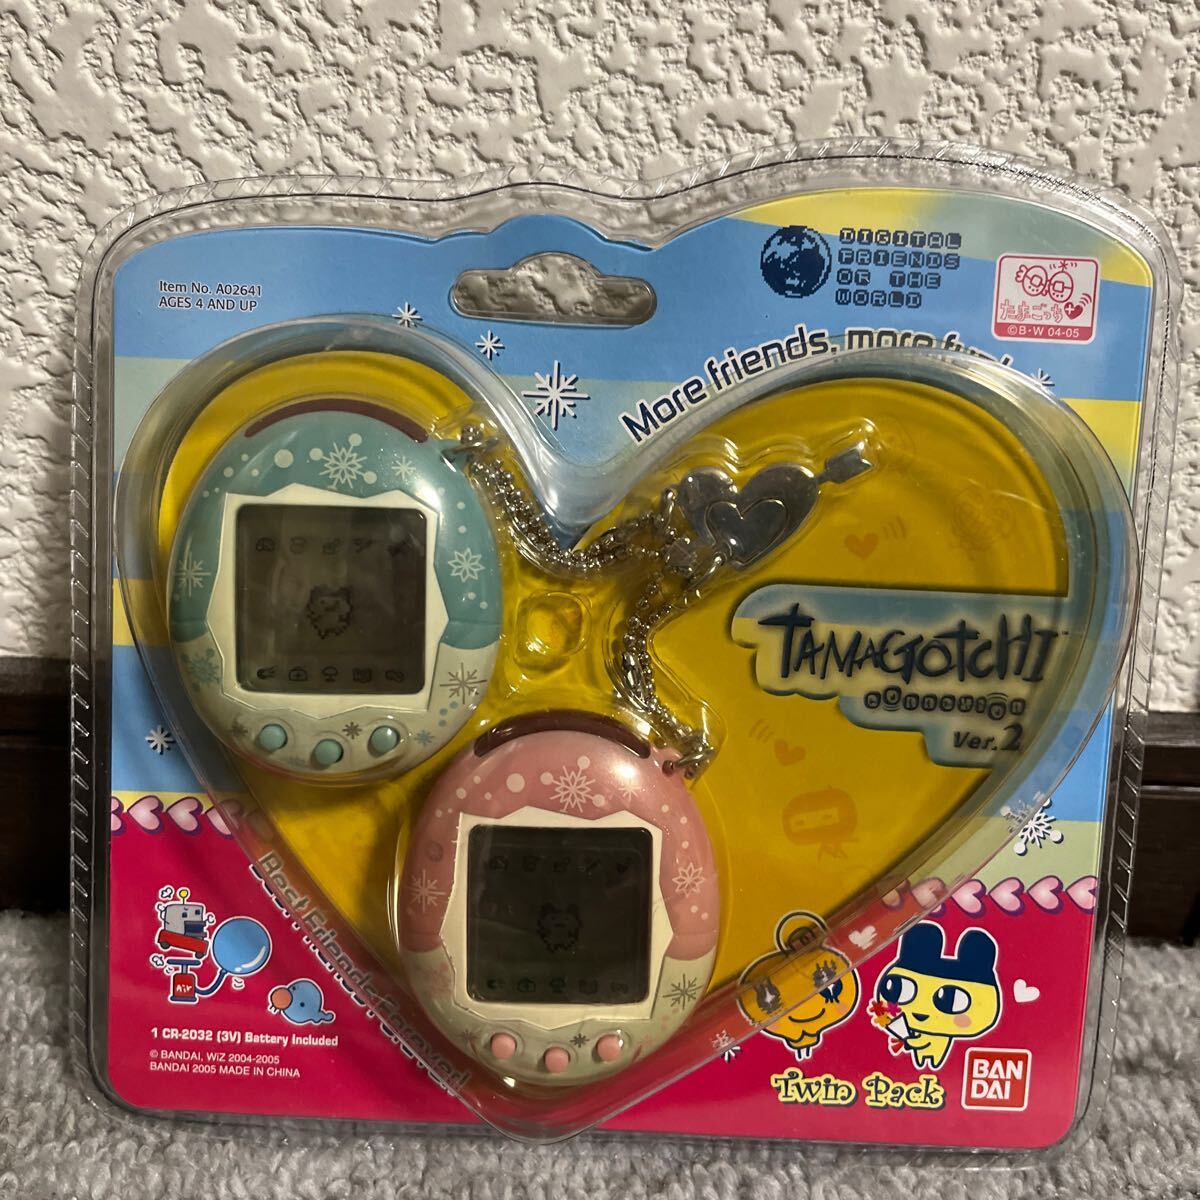 BANDAI tamagotchi connection ver2 twin pack best friends forever たまごっち海外版 未開封の画像1